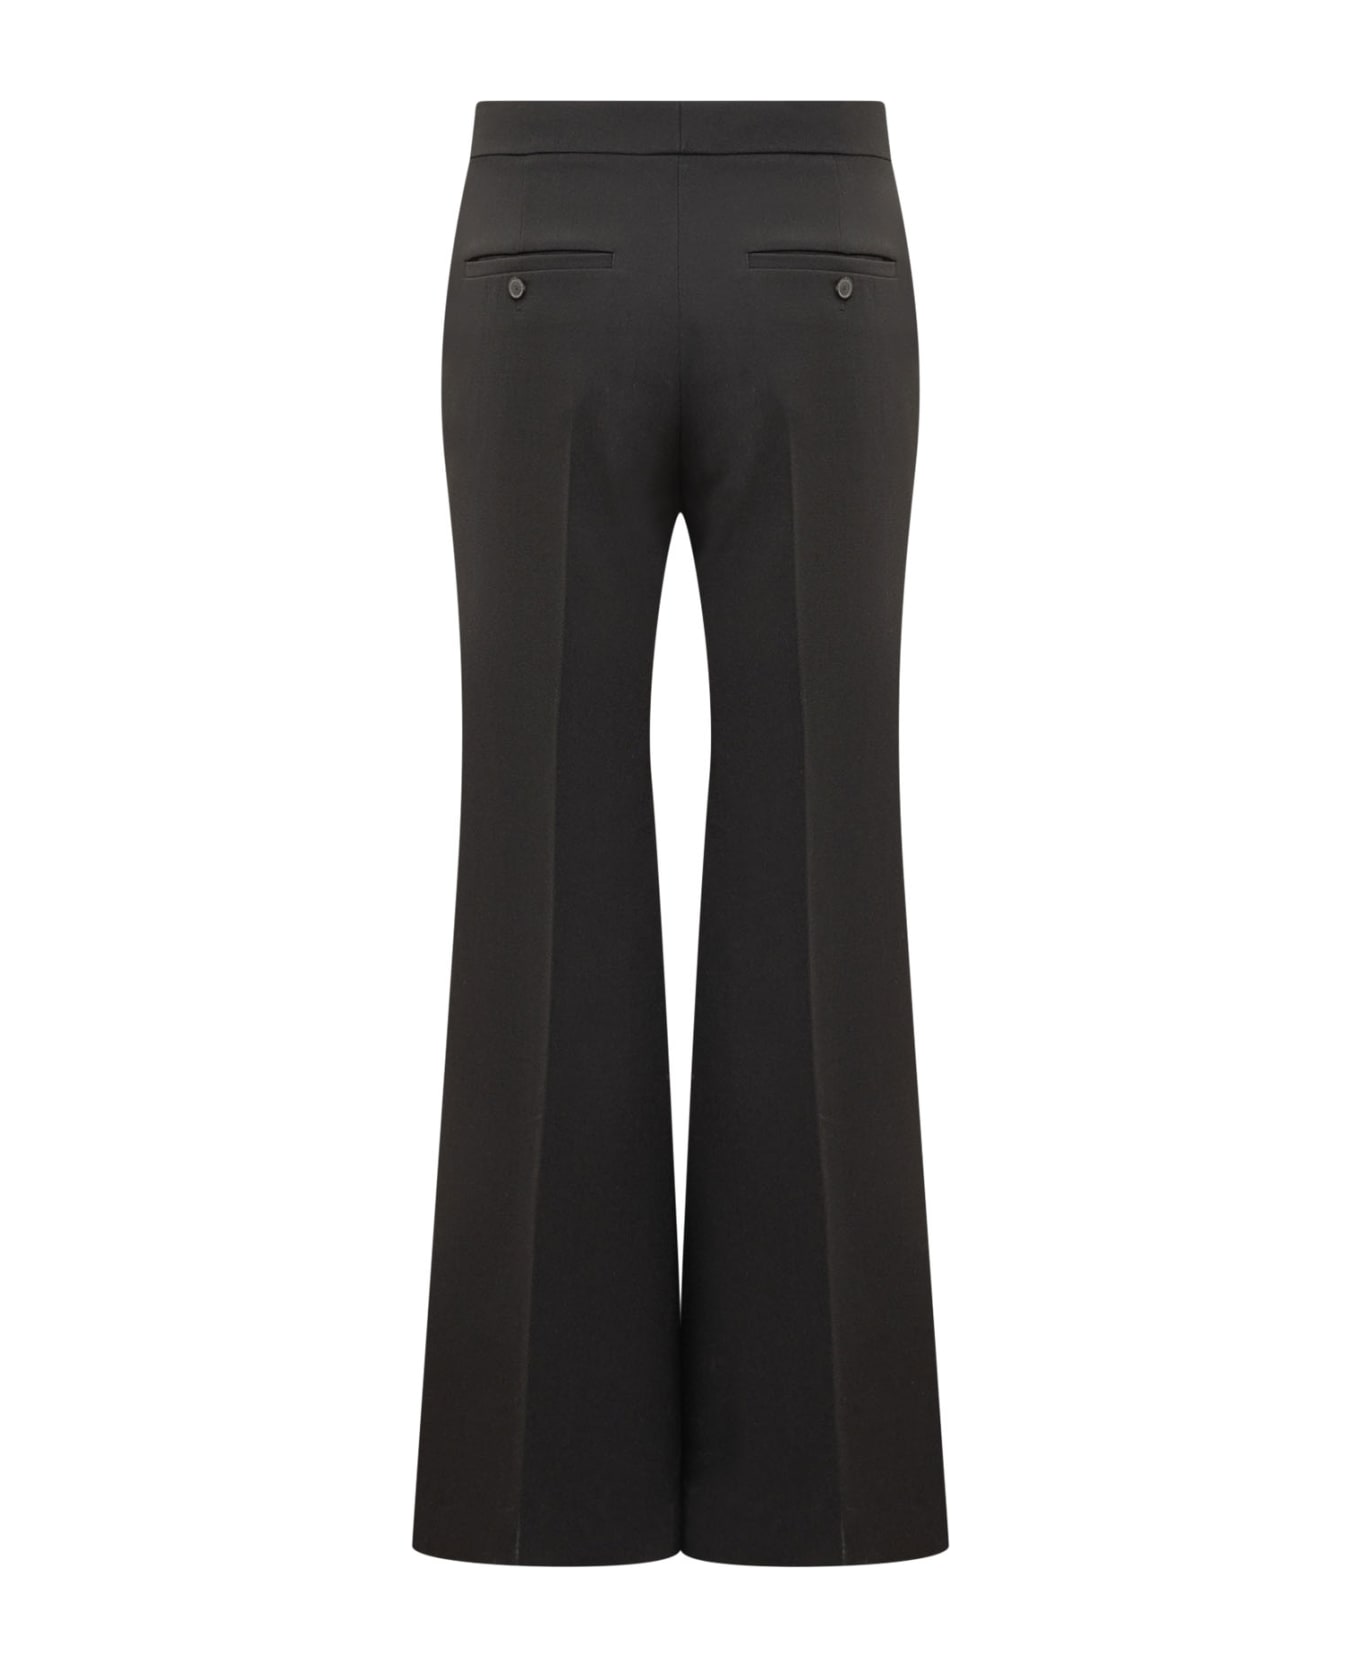 Givenchy Trousers - BLACK ボトムス